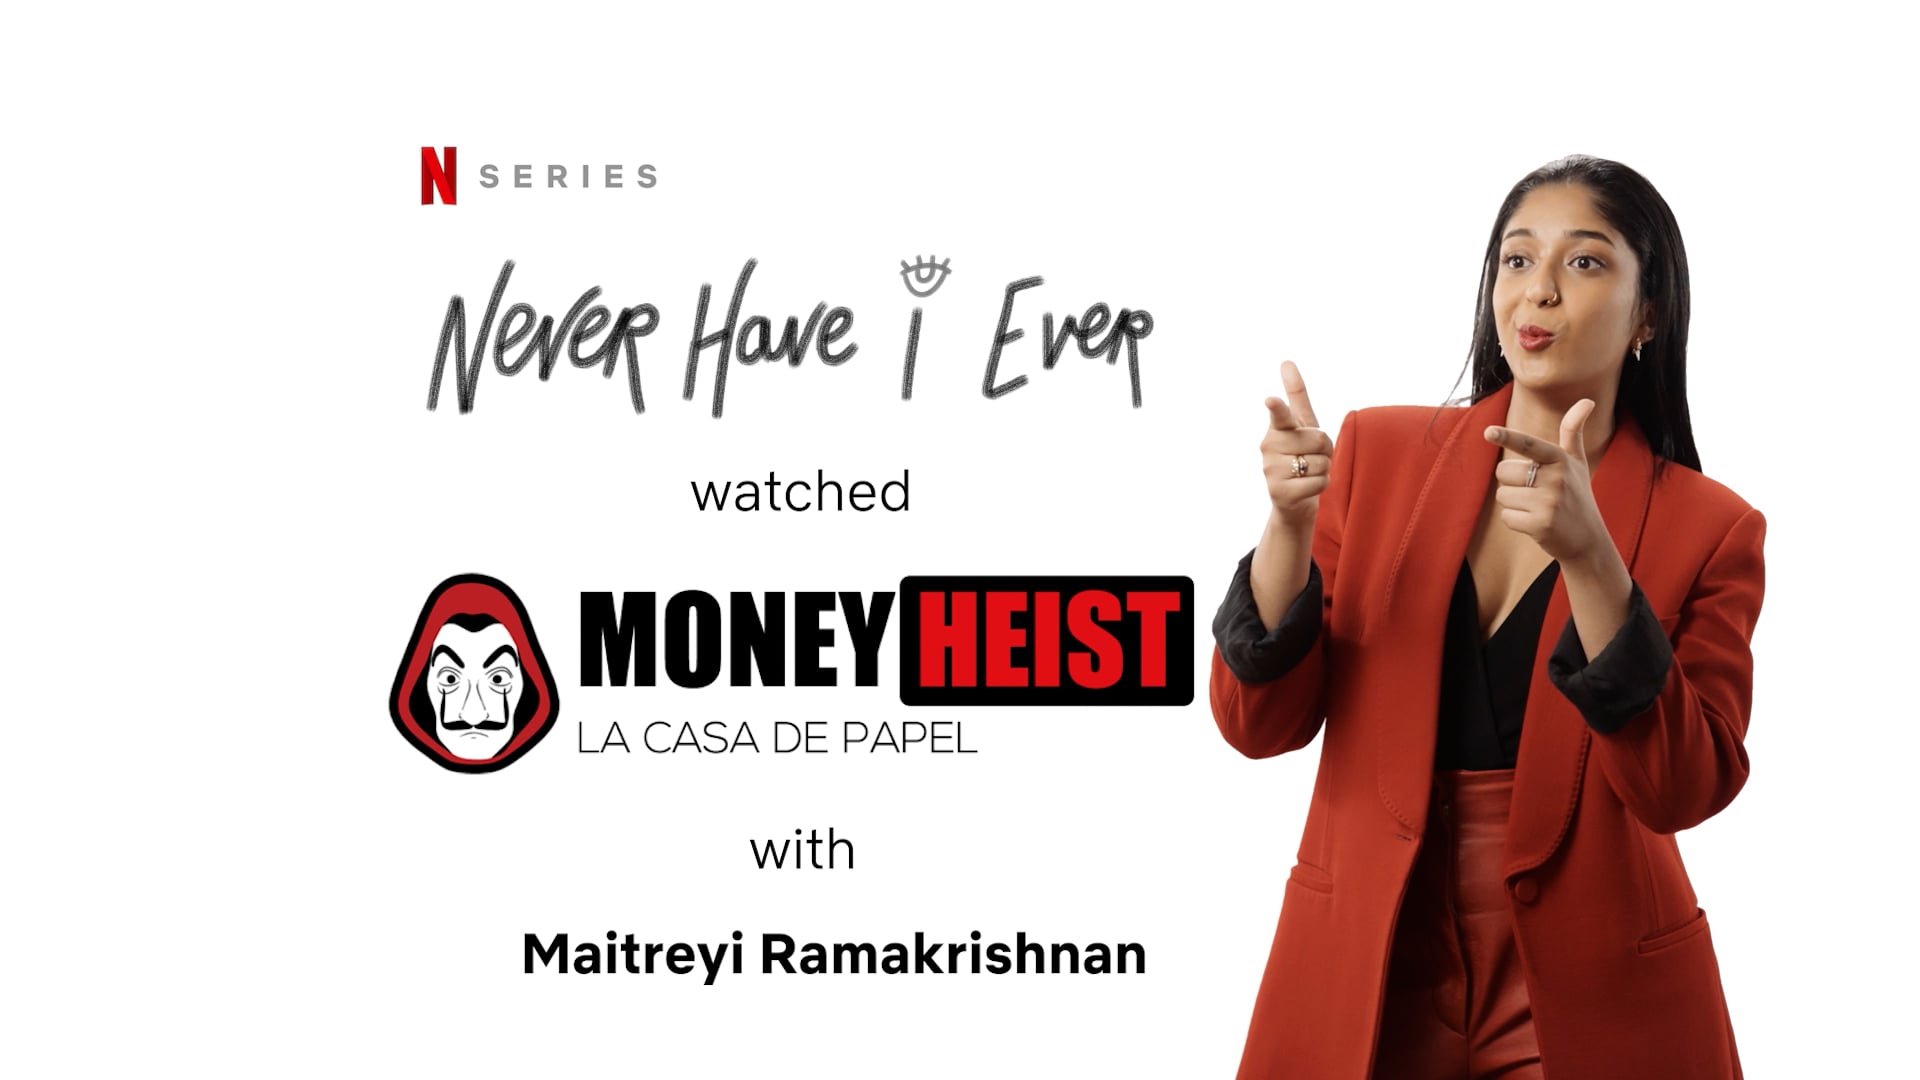 Netflix Catch Up With Maitreyi "Never Have I Ever Watched Money Heist"